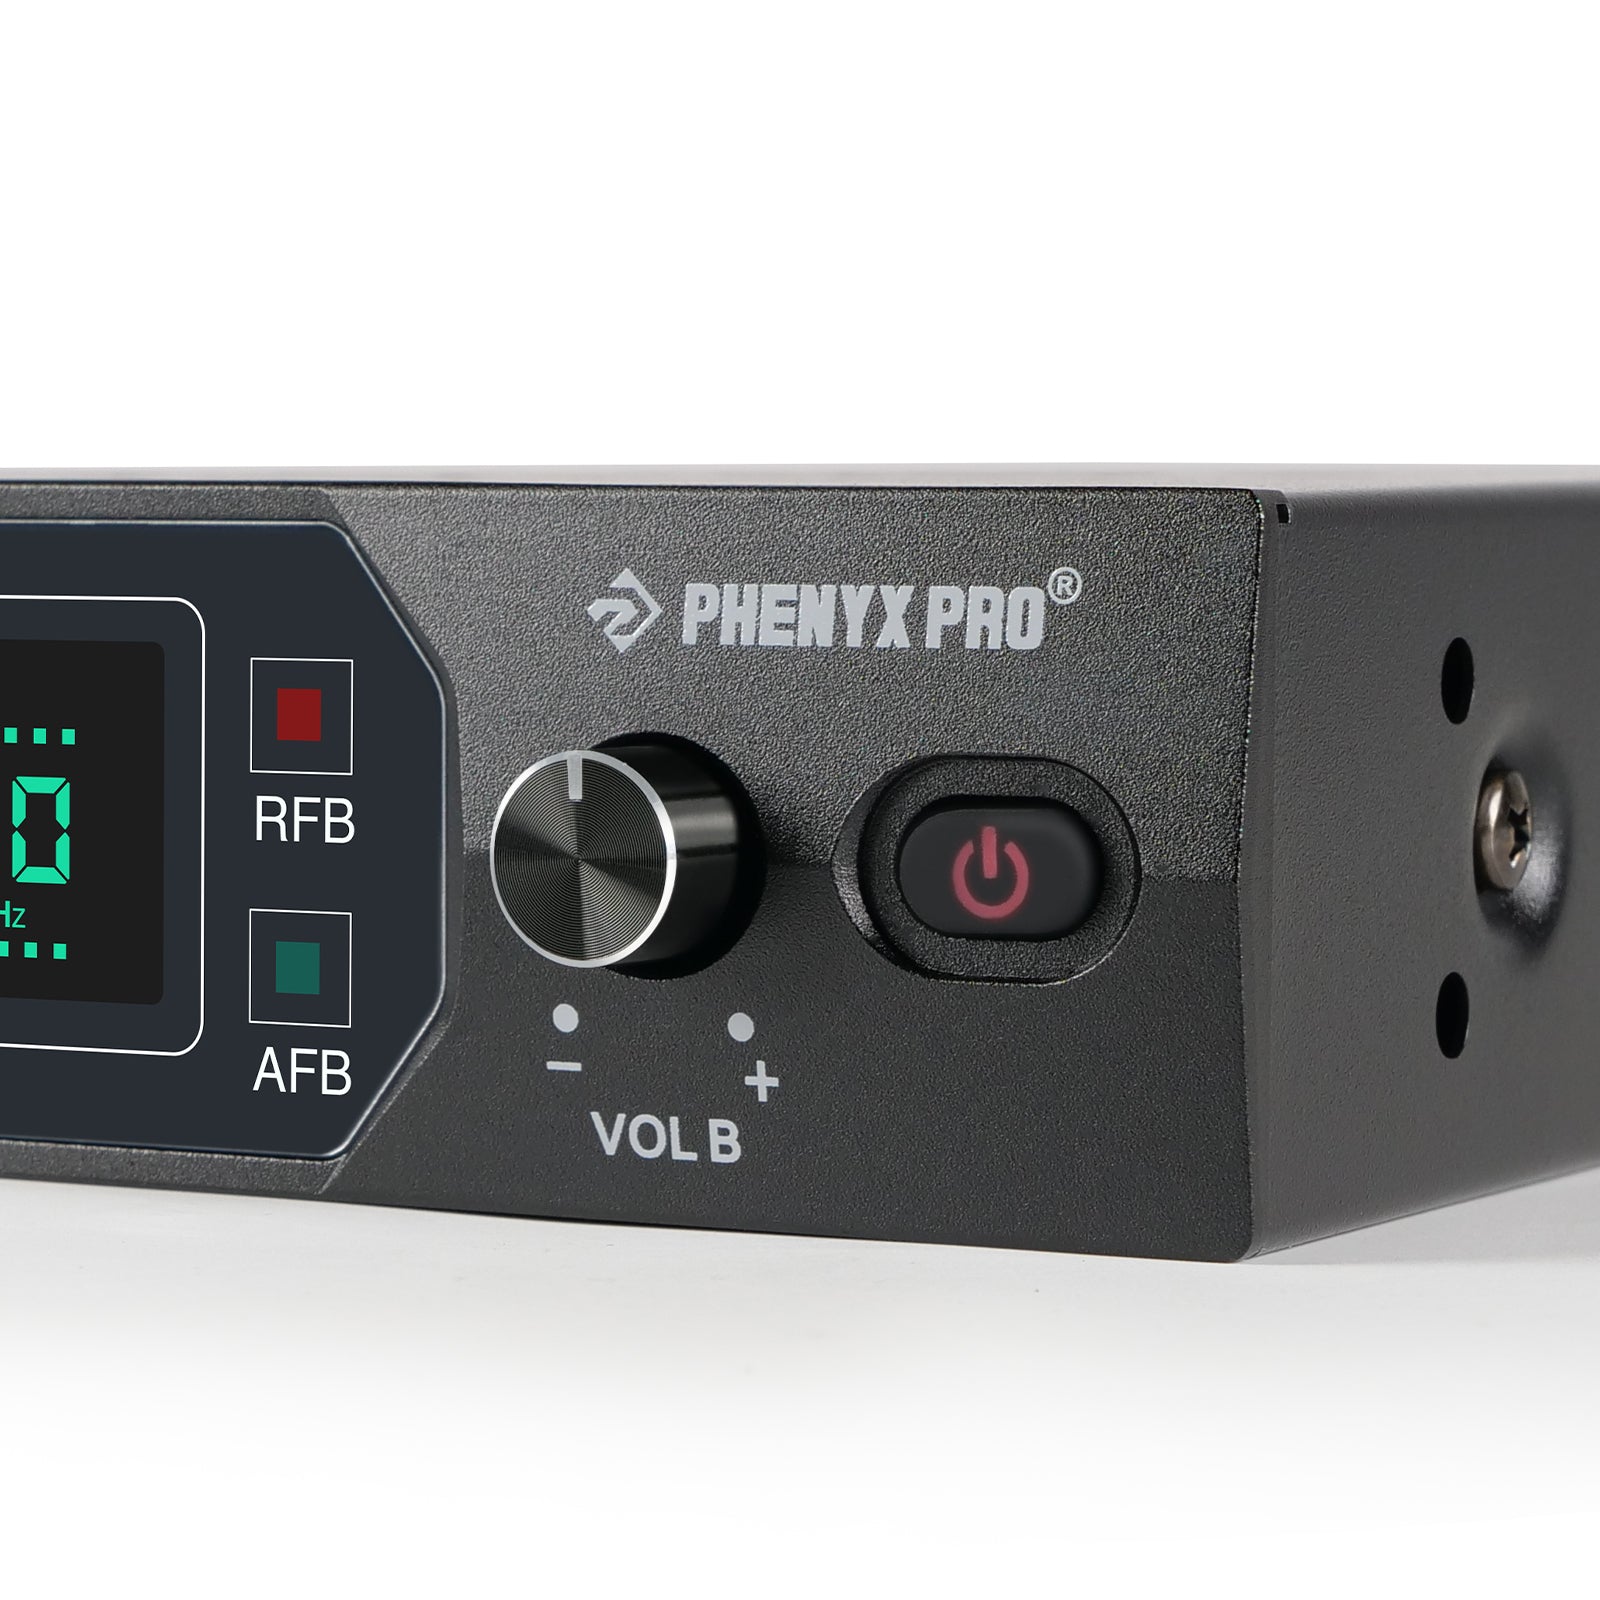 PTU-51-2H | UHF Fixed Frequency Dual Wireless Microphone System